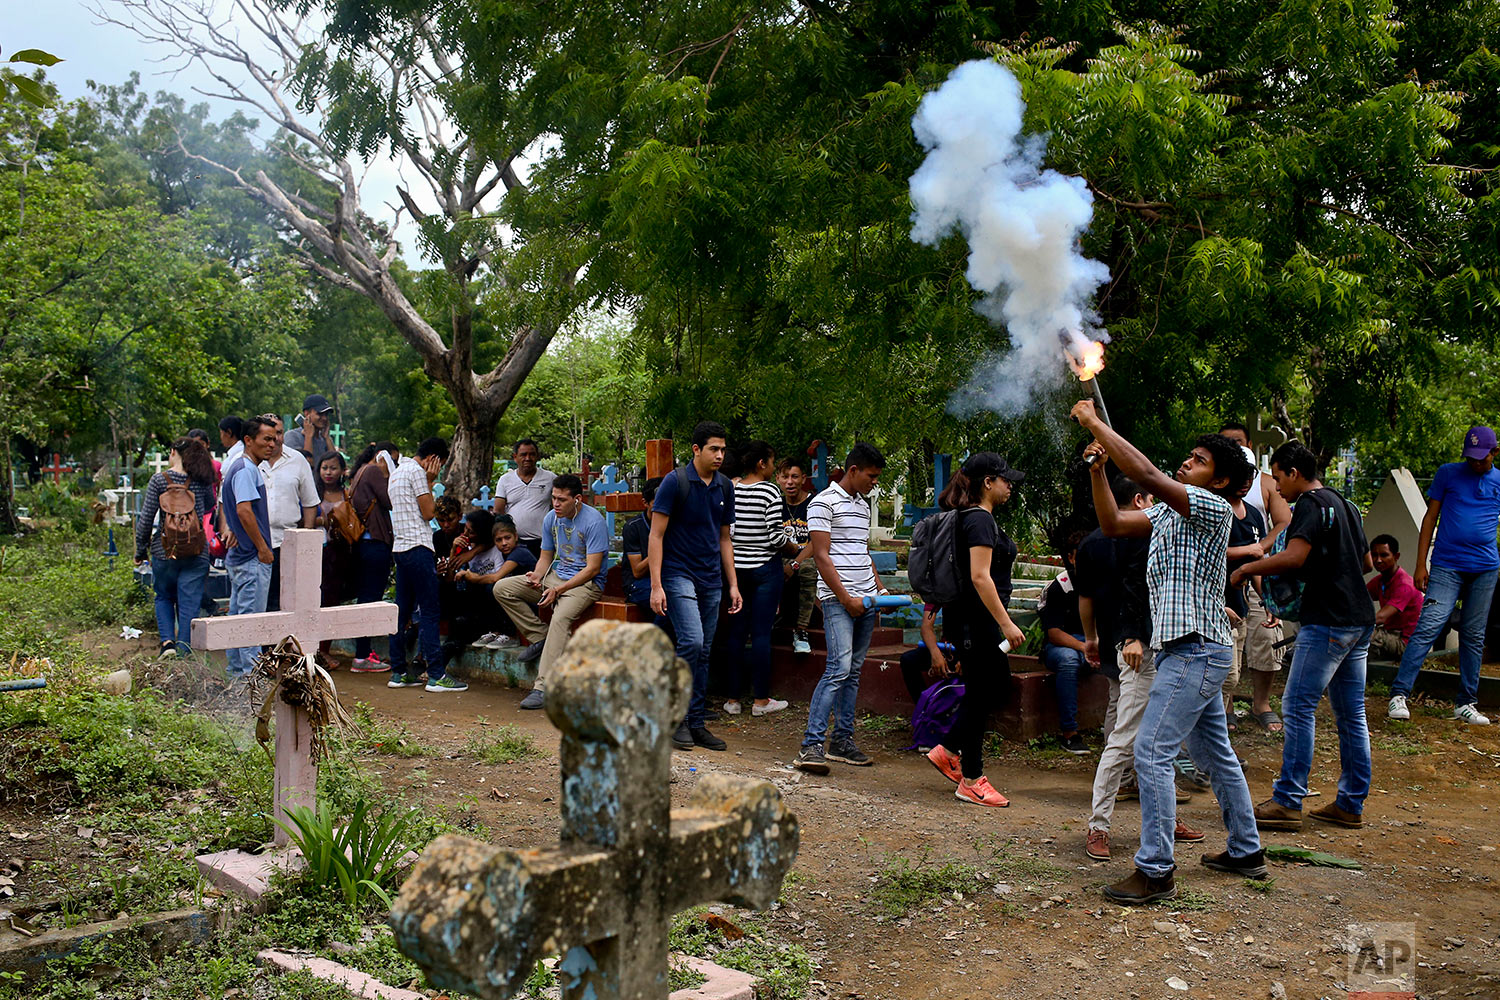  In this May 25, 2018 photo, a youth fires a handmade mortar during the burial of Manuel de Jesus Chavez at the cemetery in Leon, Nicaragua. Chavez, 38, died during clashes with police as anti-government protesters blocked the Panamerican Highway. (A